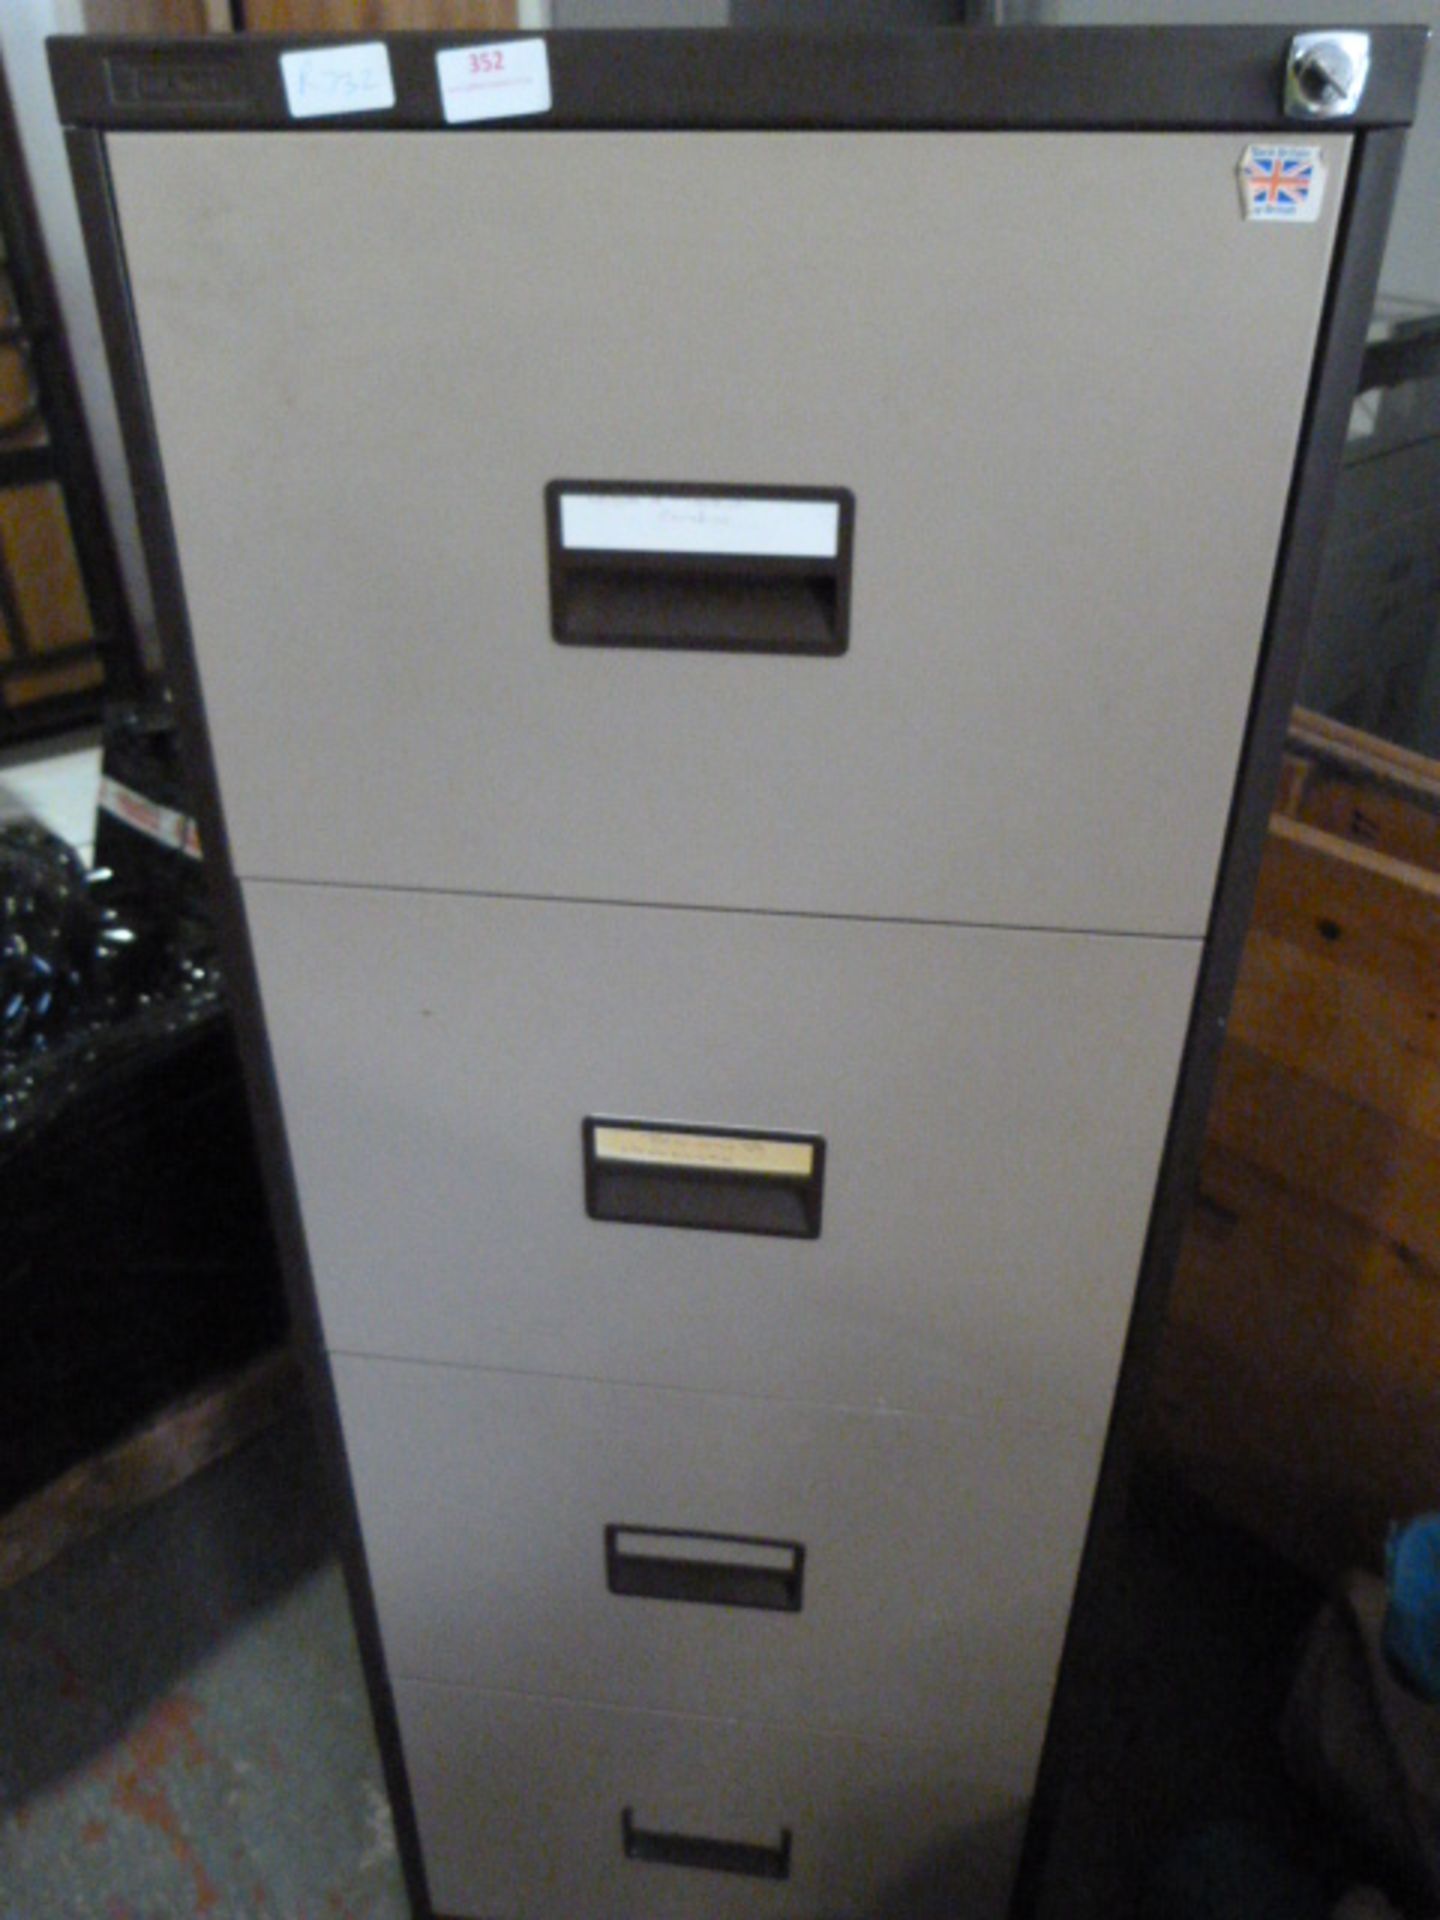 *Four Drawer Filing Cabinet